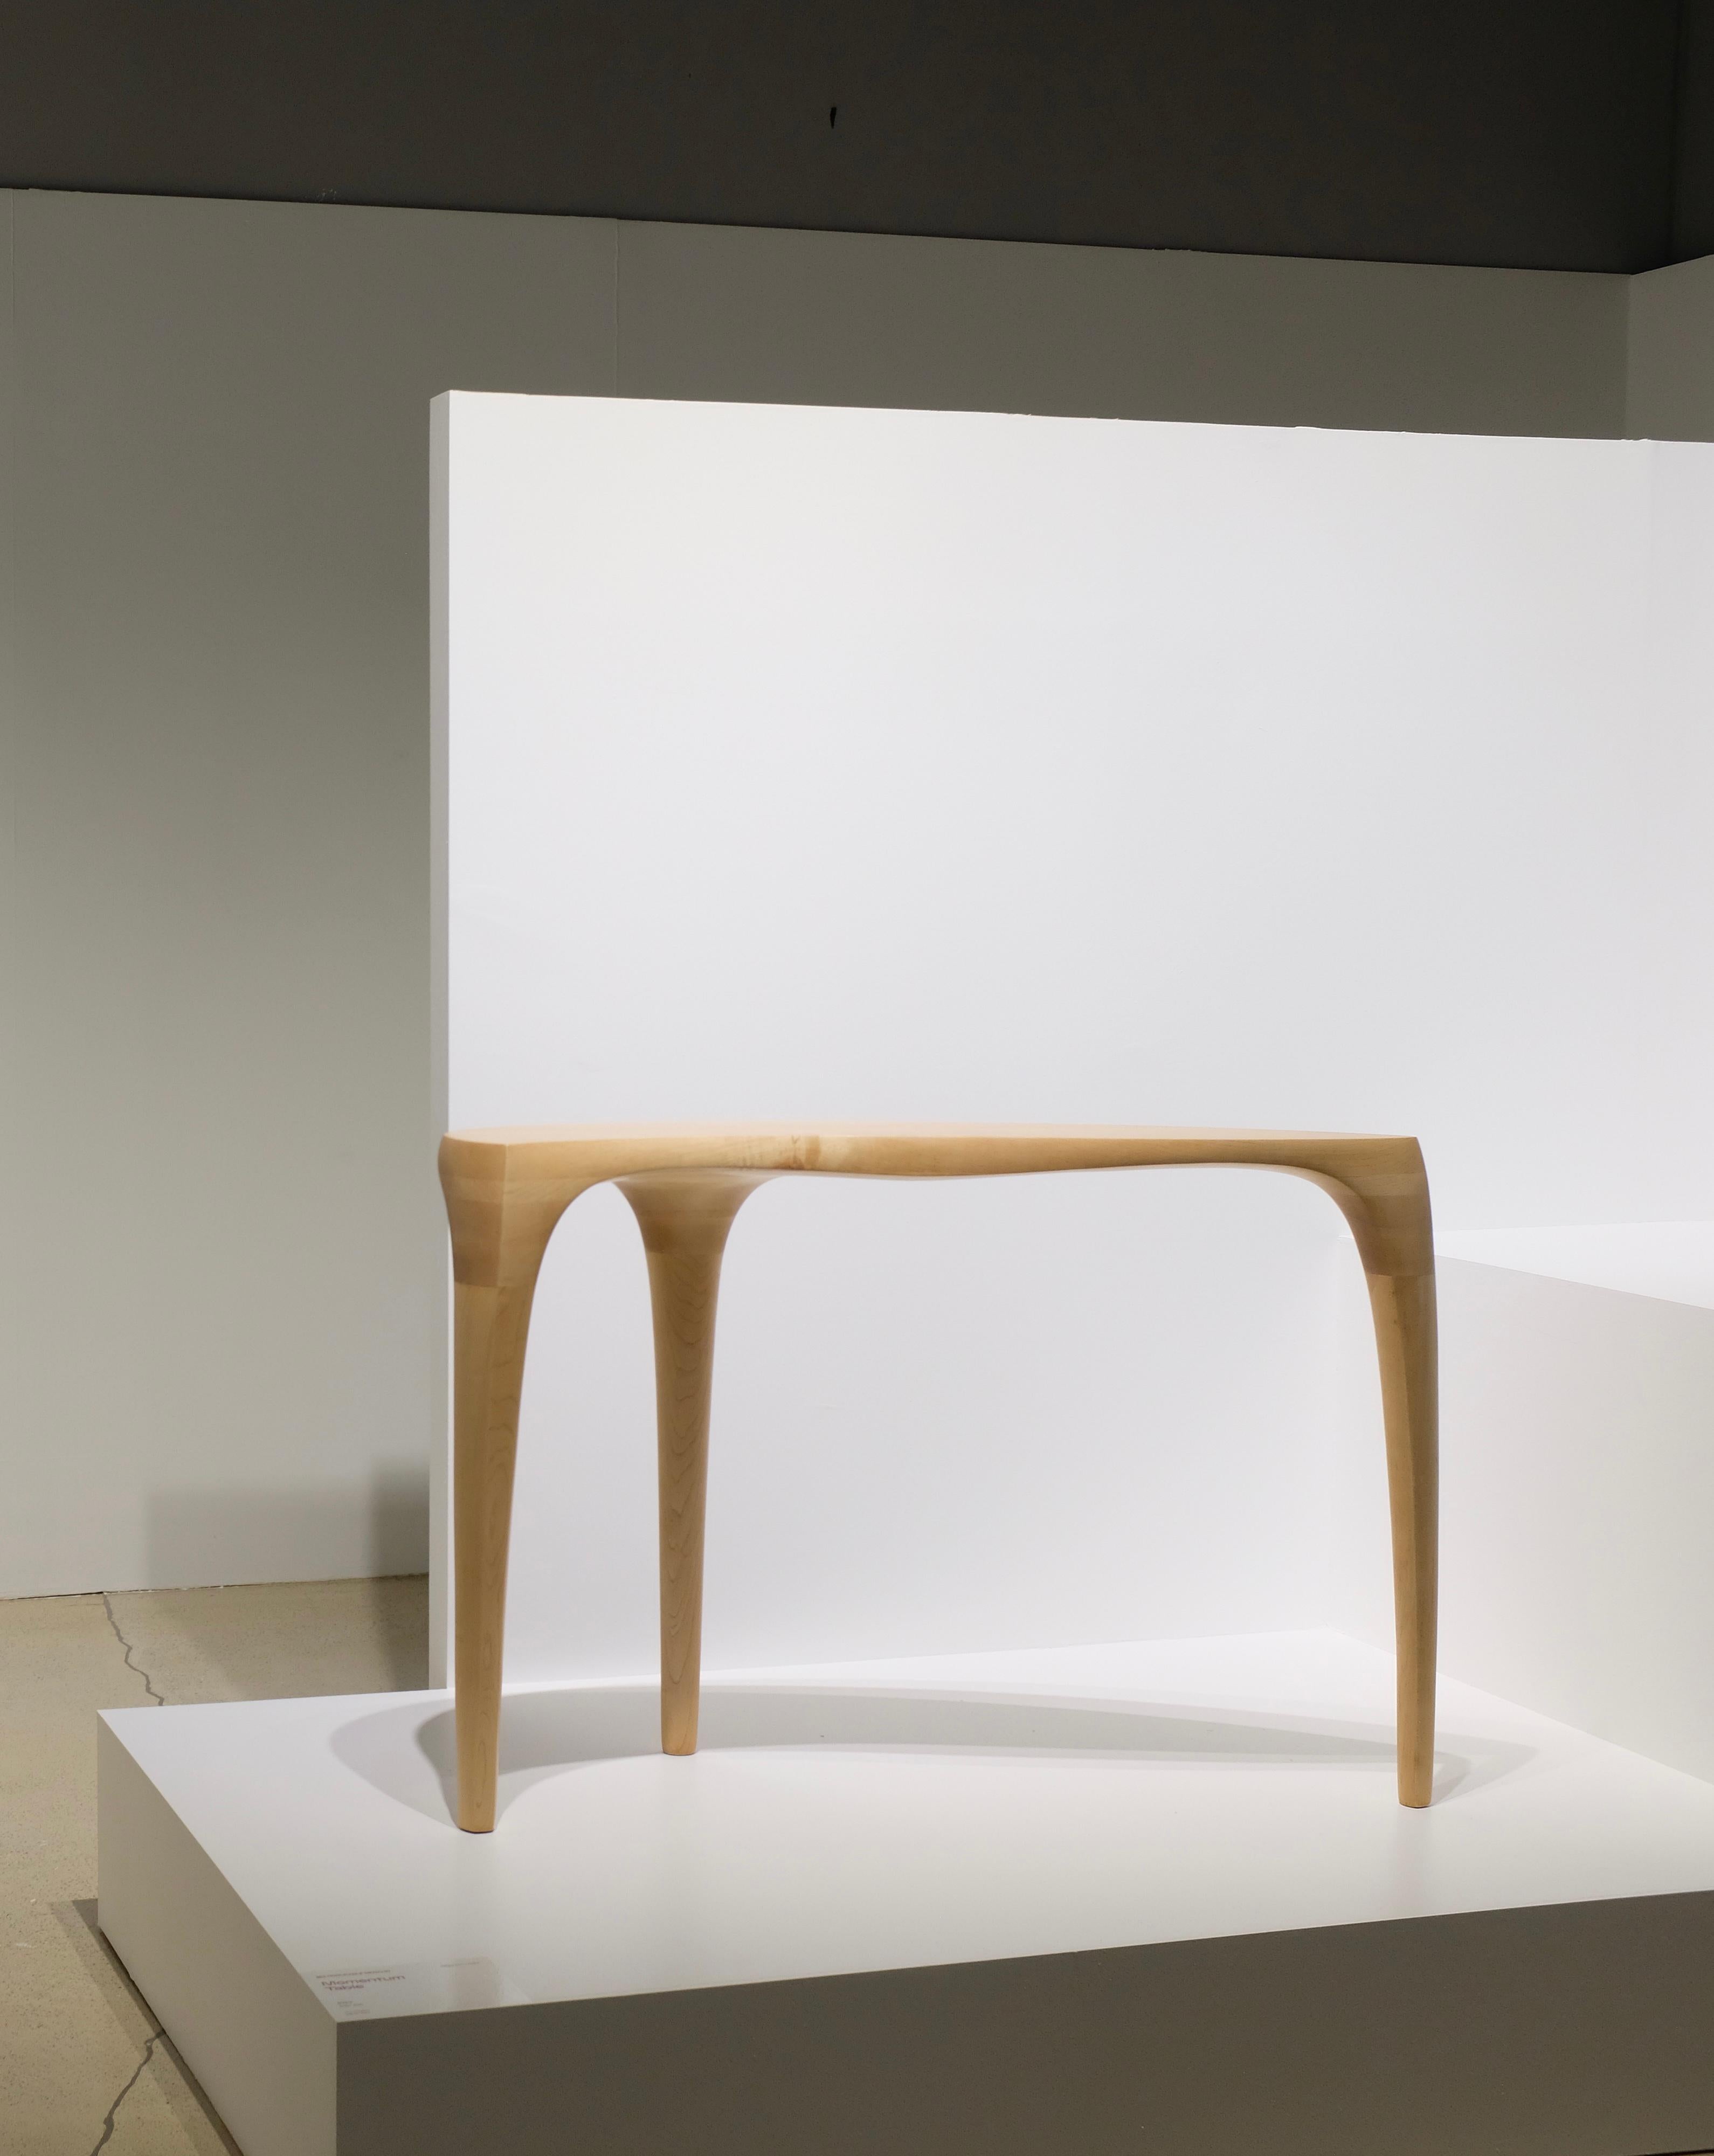 Sculptural Console Table in Hard Maple Wood - 'Momentum Table' by Soo Joo For Sale 2